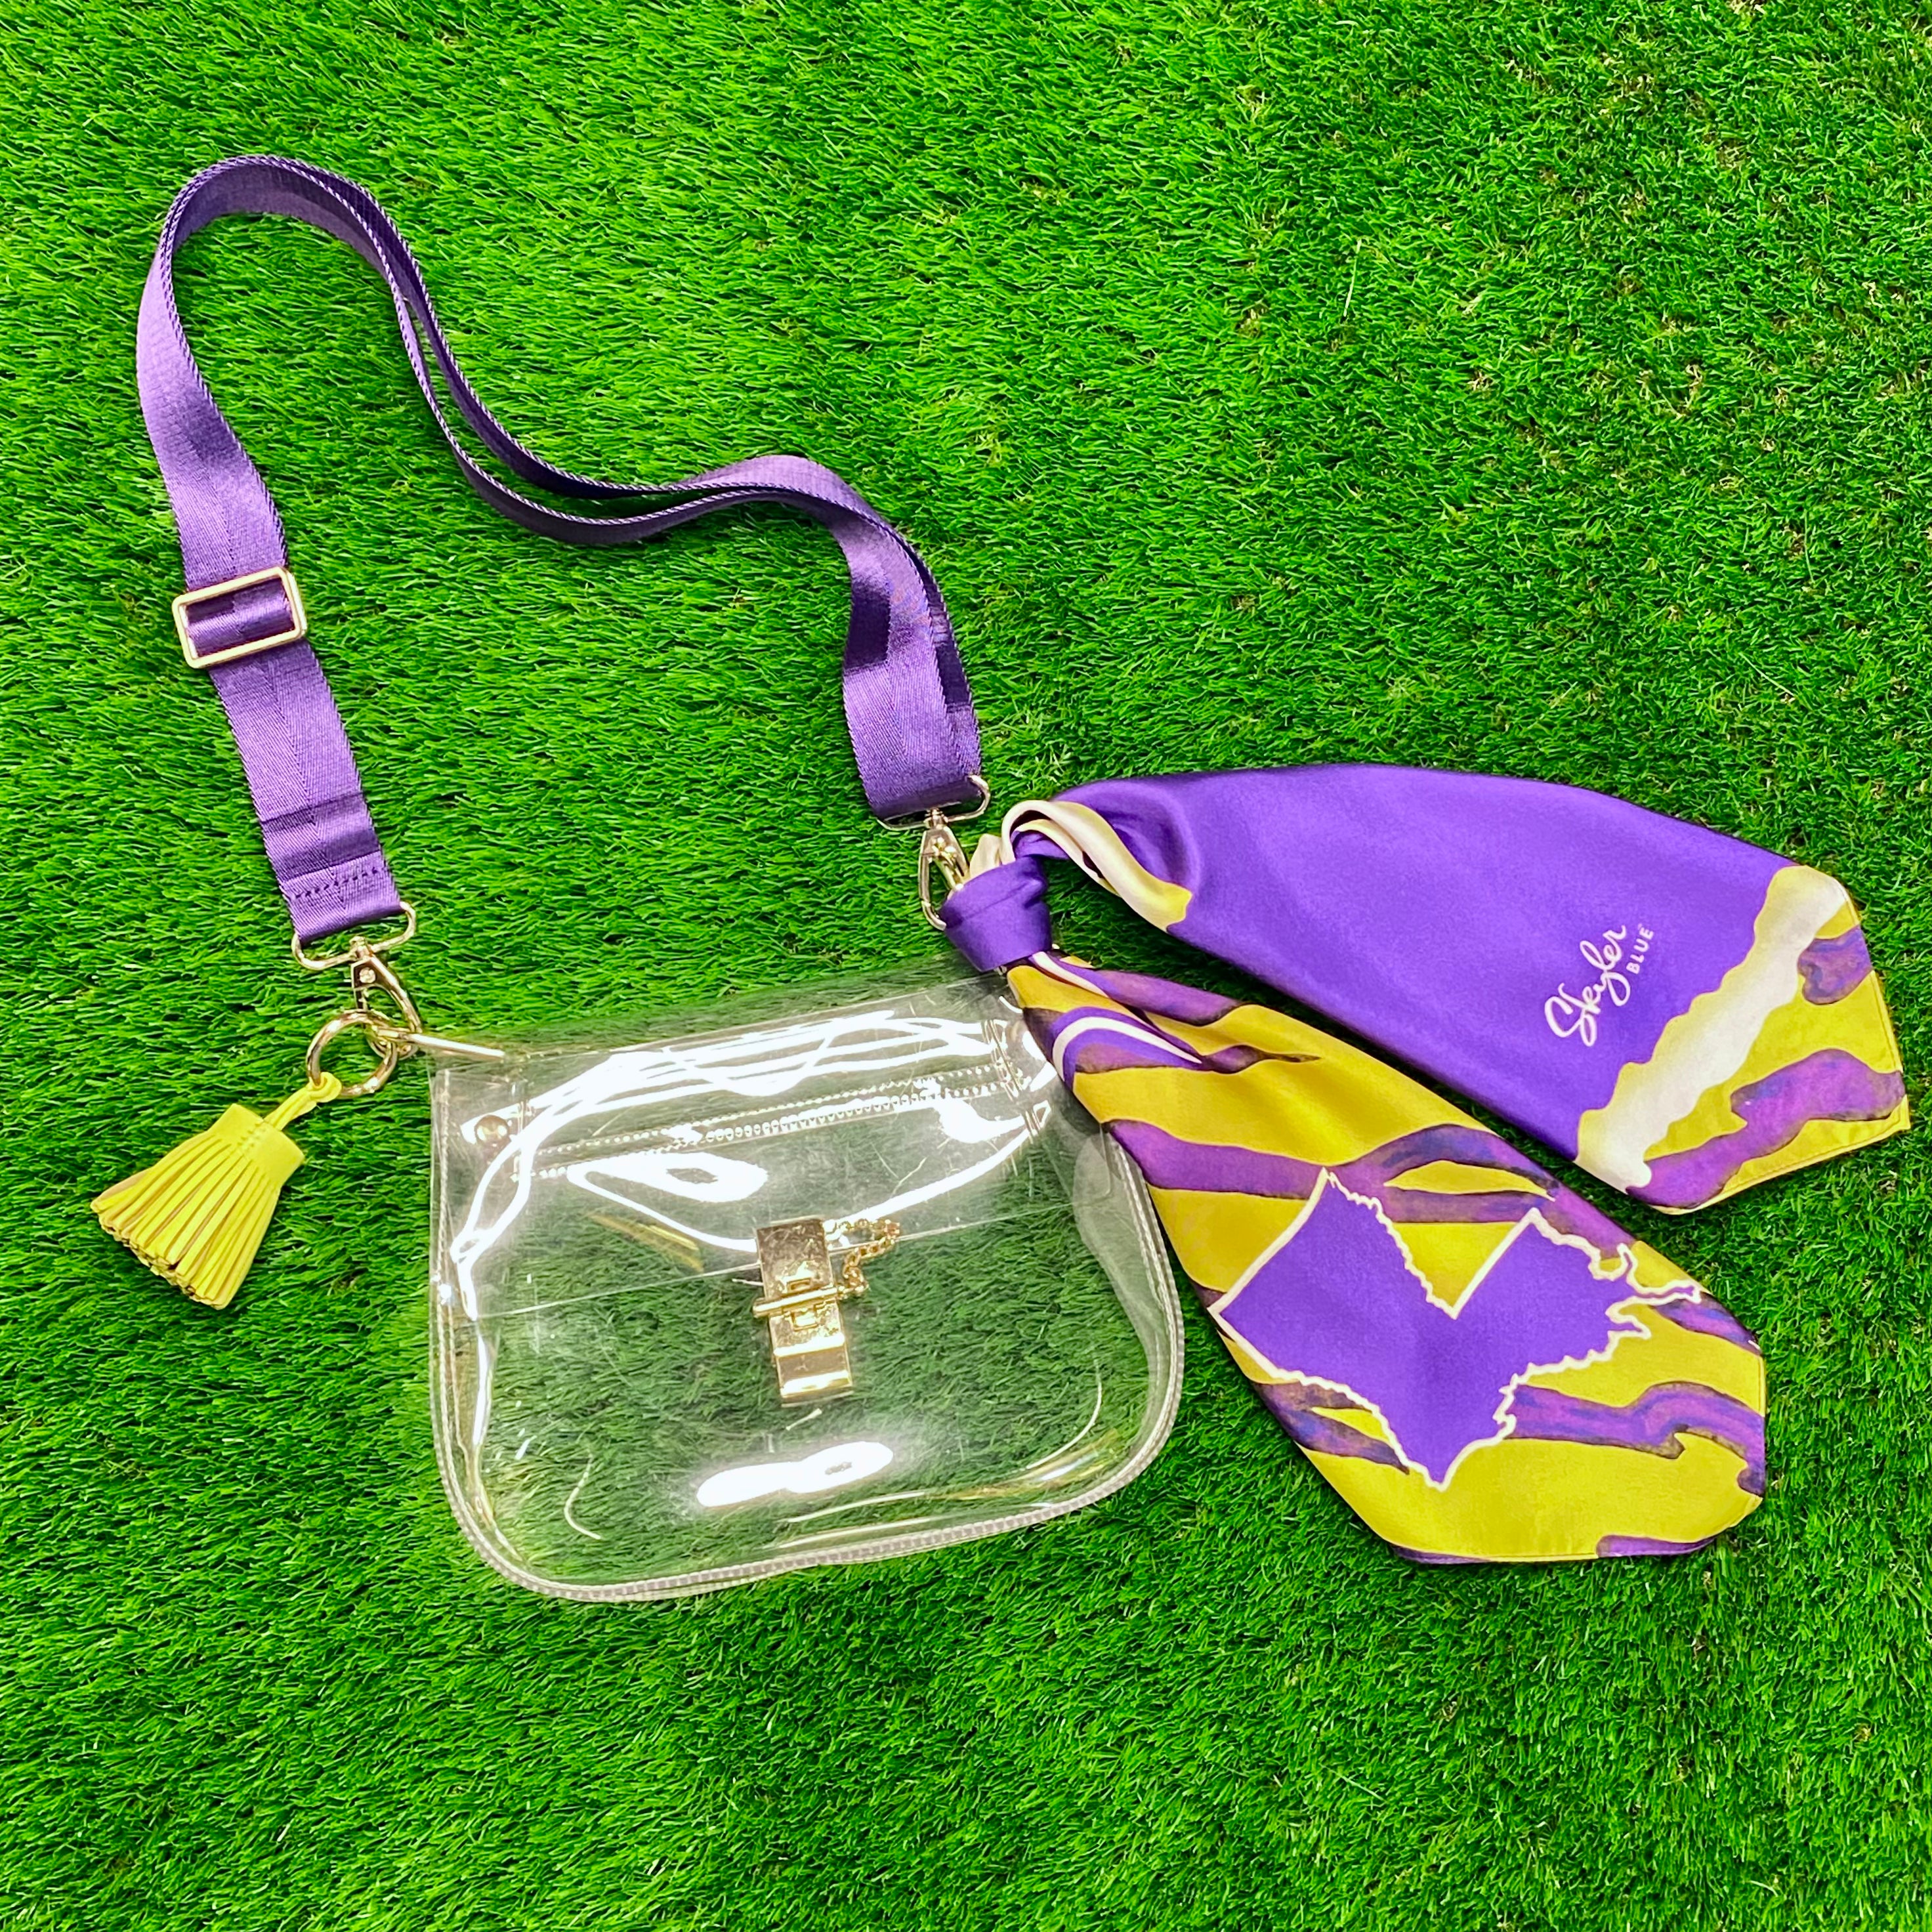 Skyler Blue’s The Baton Rouge Medium Saddle Clear Bag stadium approved clear bag / clear purse including adjustable, nylon webbing shoulder or crossbody strap with herringbone weave and gold hardware, 60-centimeter 100% silk twill scarf, and 100% genuine leather tassel. 